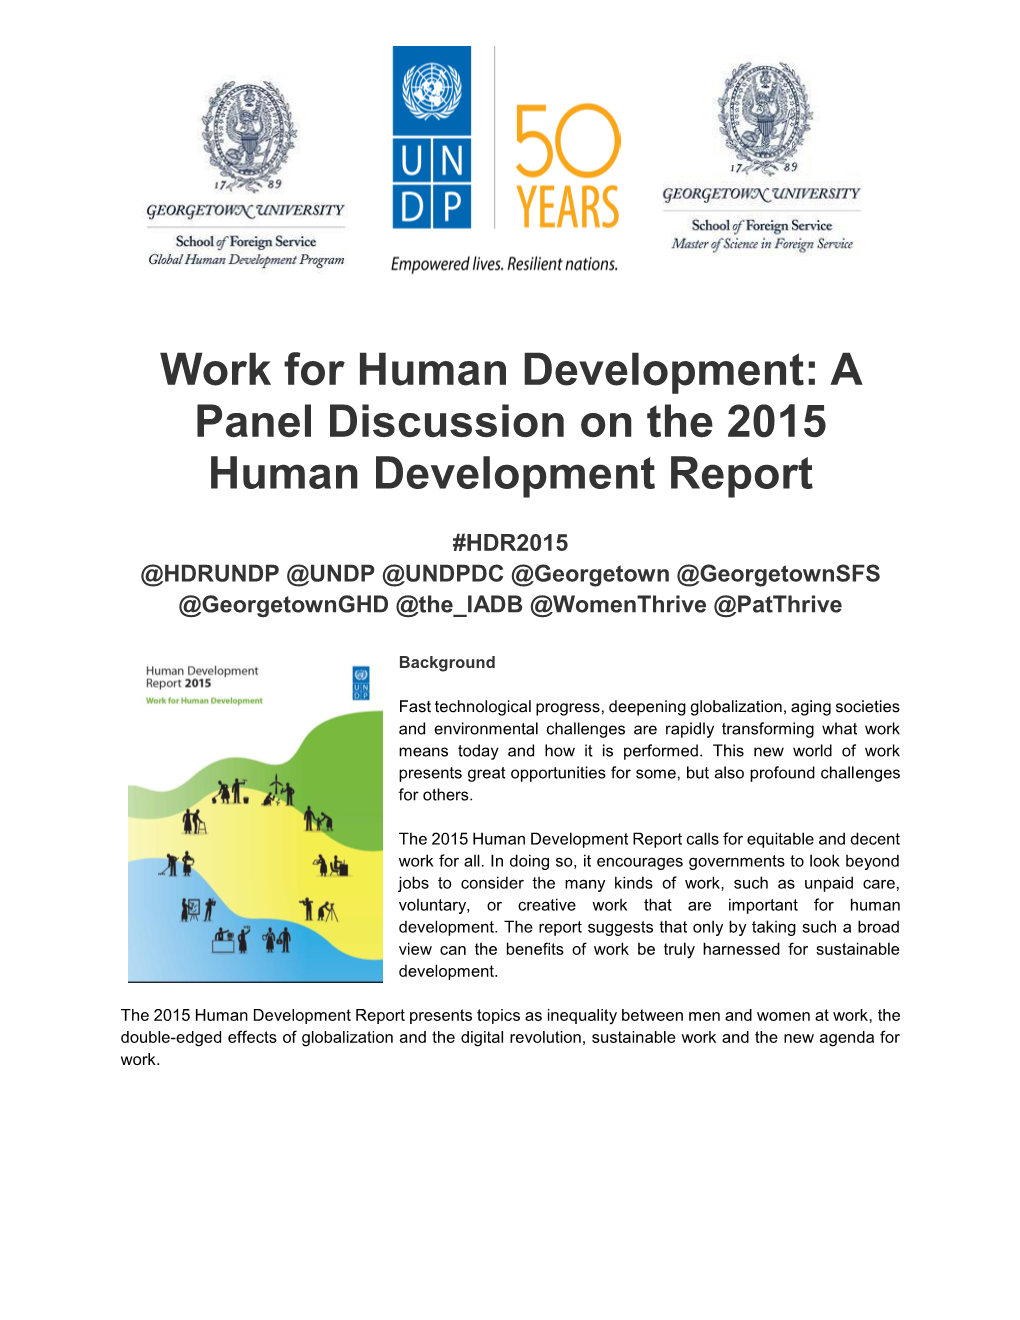 Work for Human Development: a Panel Discussion on the 2015 Human Development Report